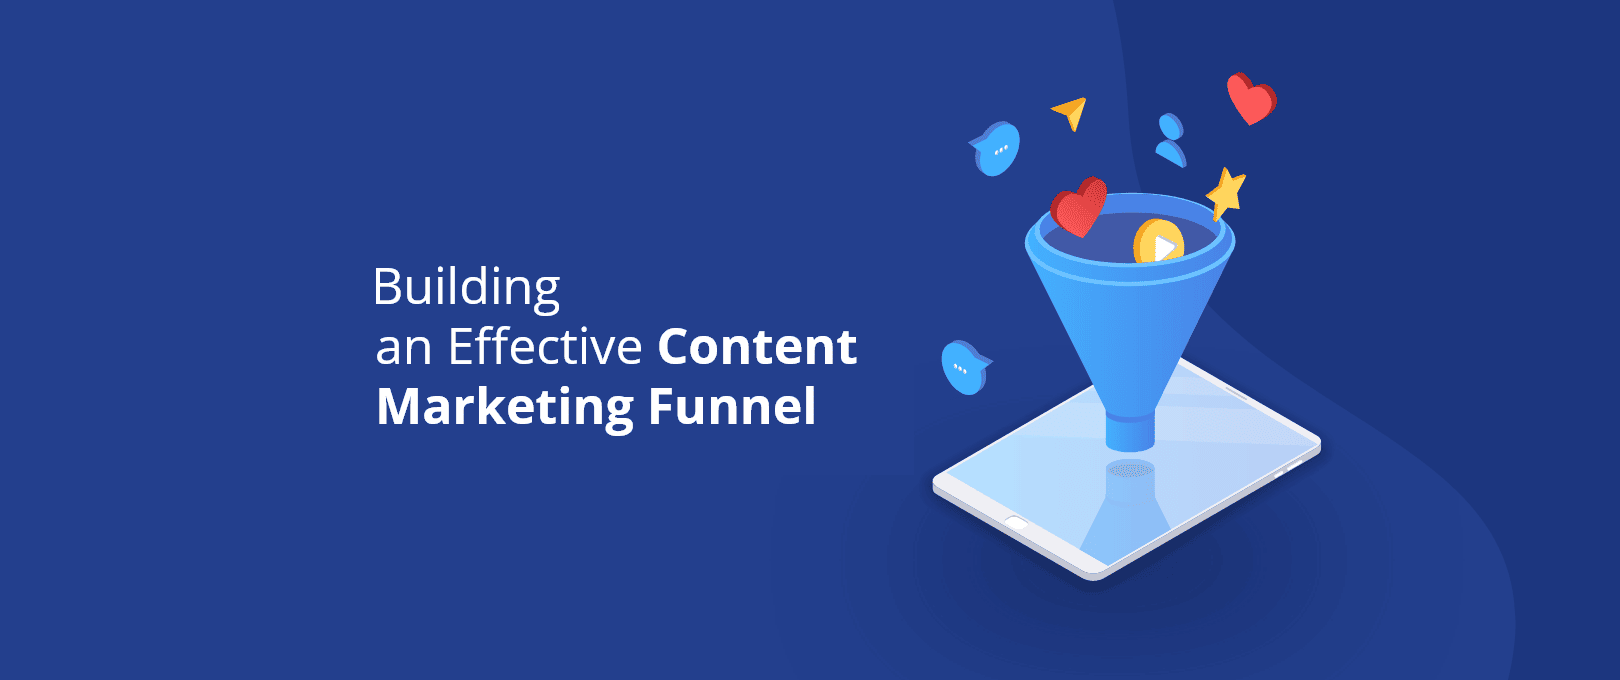 Building an Optimized Content Marketing Funnel